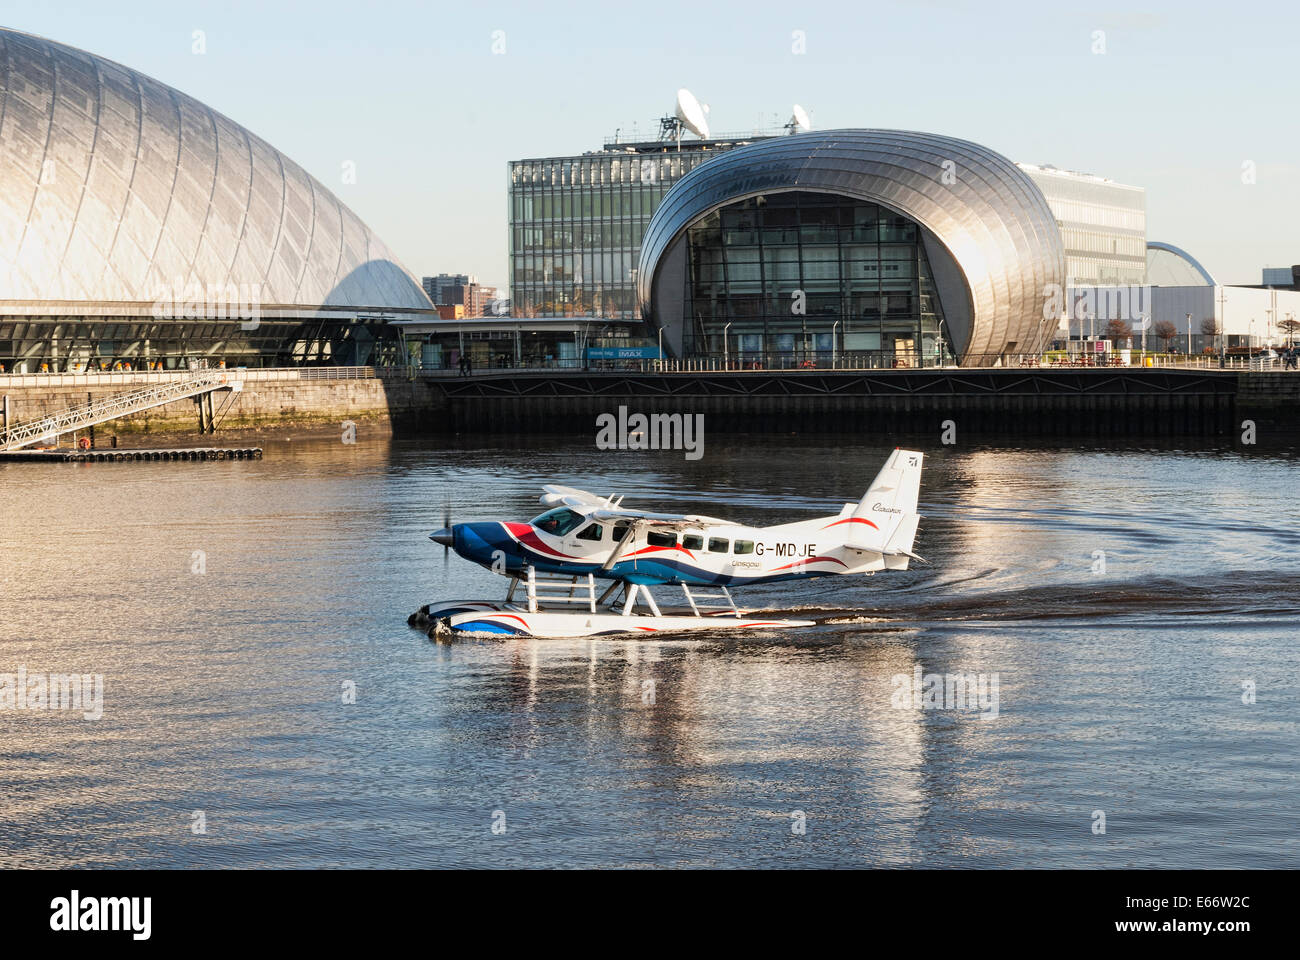 Seaplane taking off at Glasgow Science Centre. Stock Photo